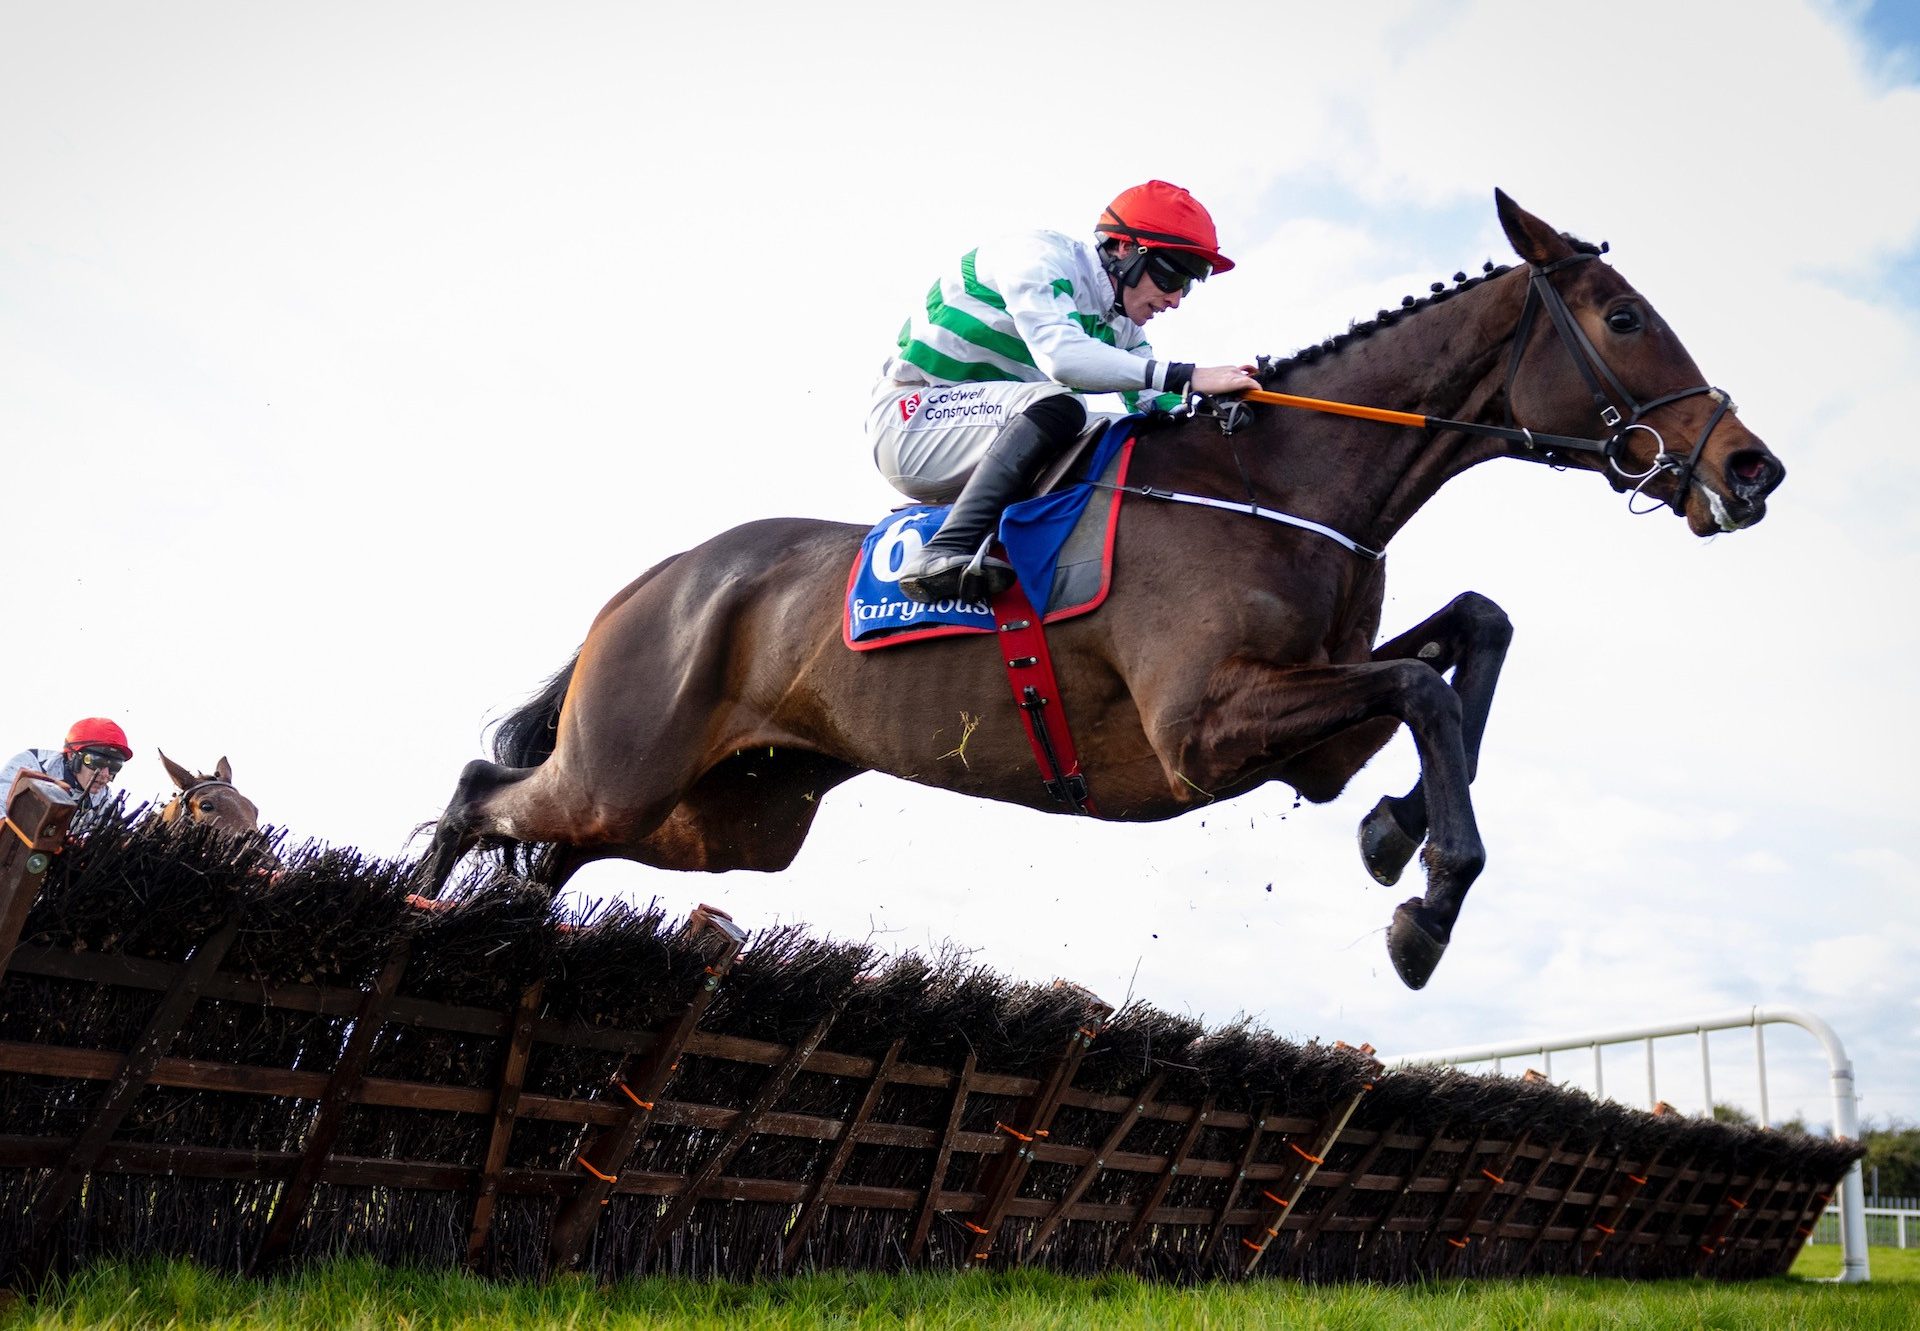 Firefox (Walk In The Park) Wins The Maiden Hurdle At Fairyhouse